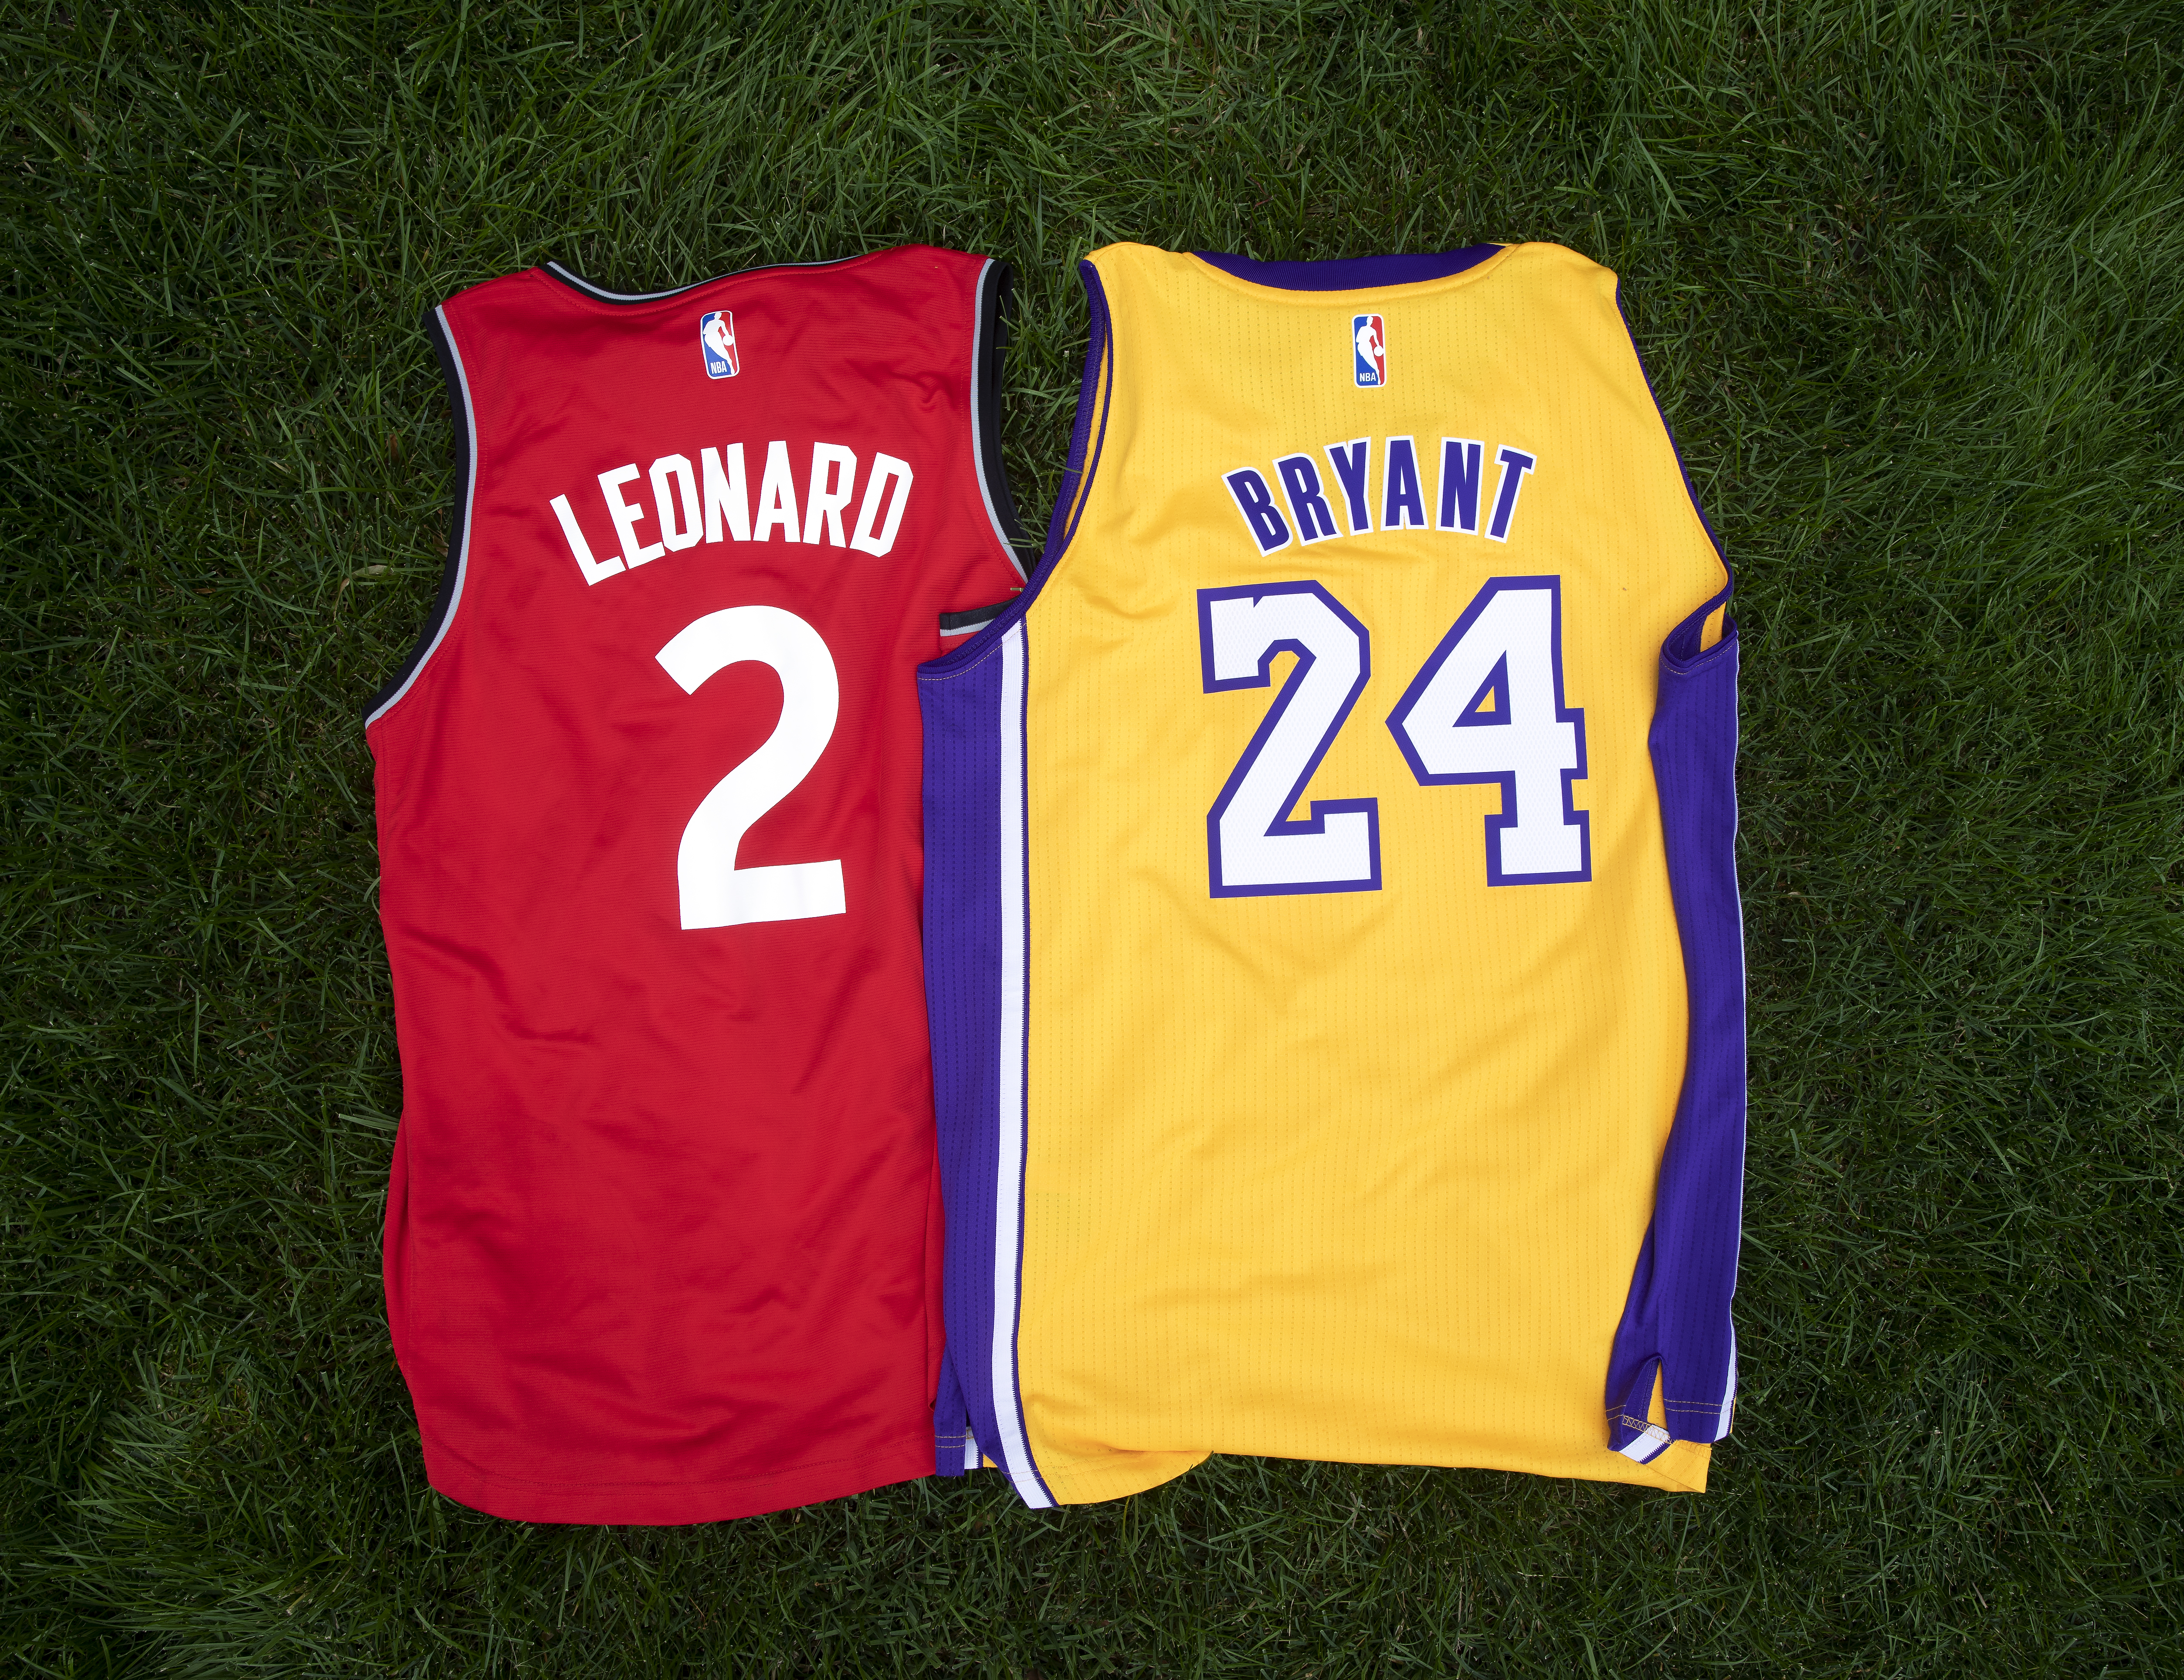 Jersey: Why do NBA players wear No. 23 on jerseys? Significance explained